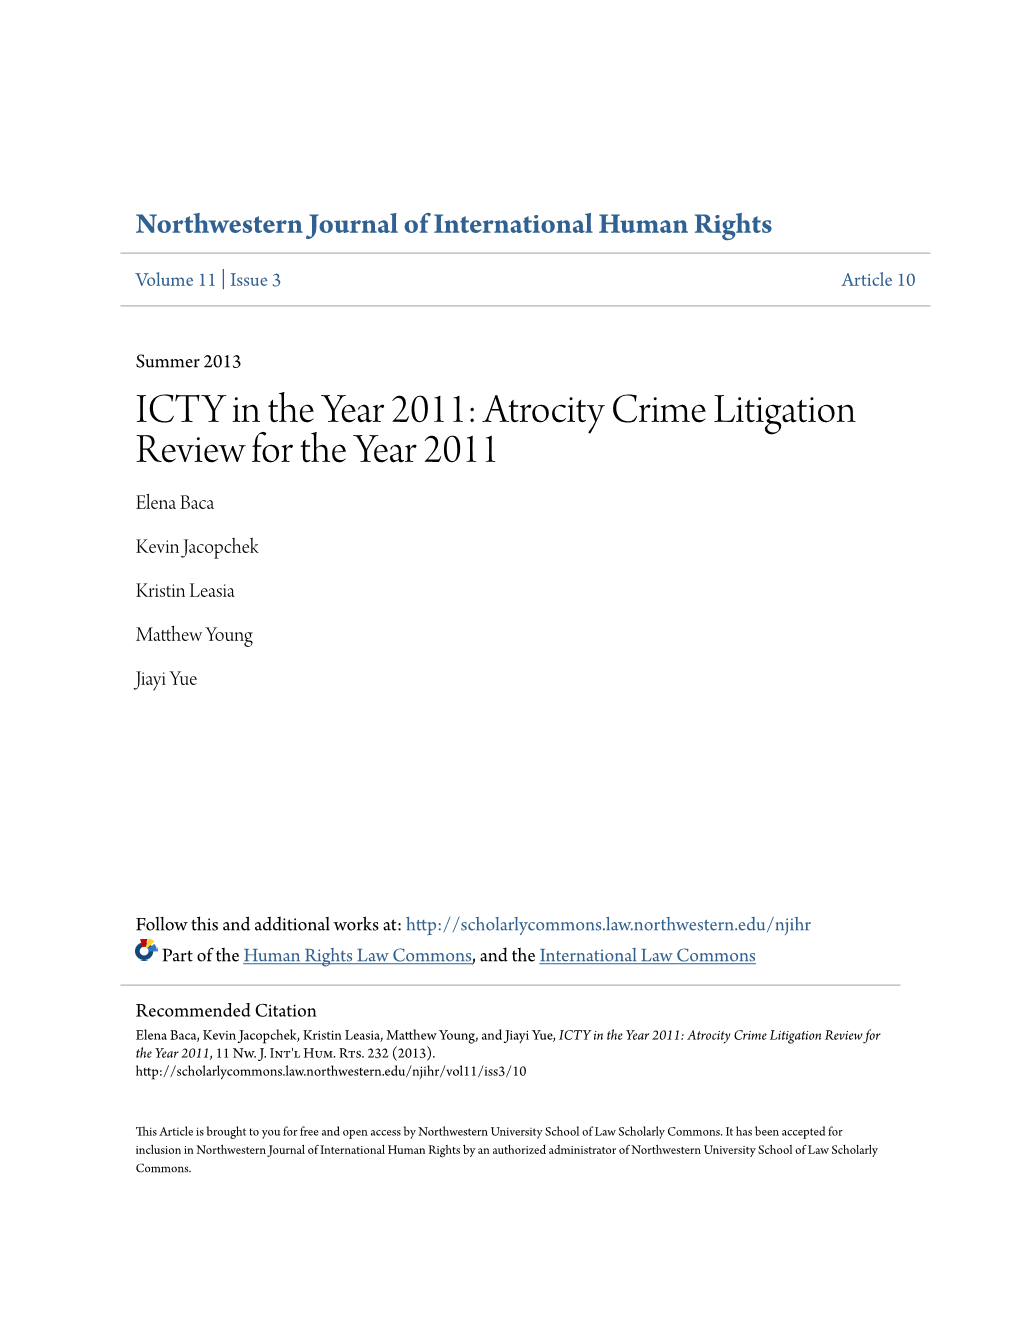 ICTY in the Year 2011: Atrocity Crime Litigation Review for the Year 2011 Elena Baca